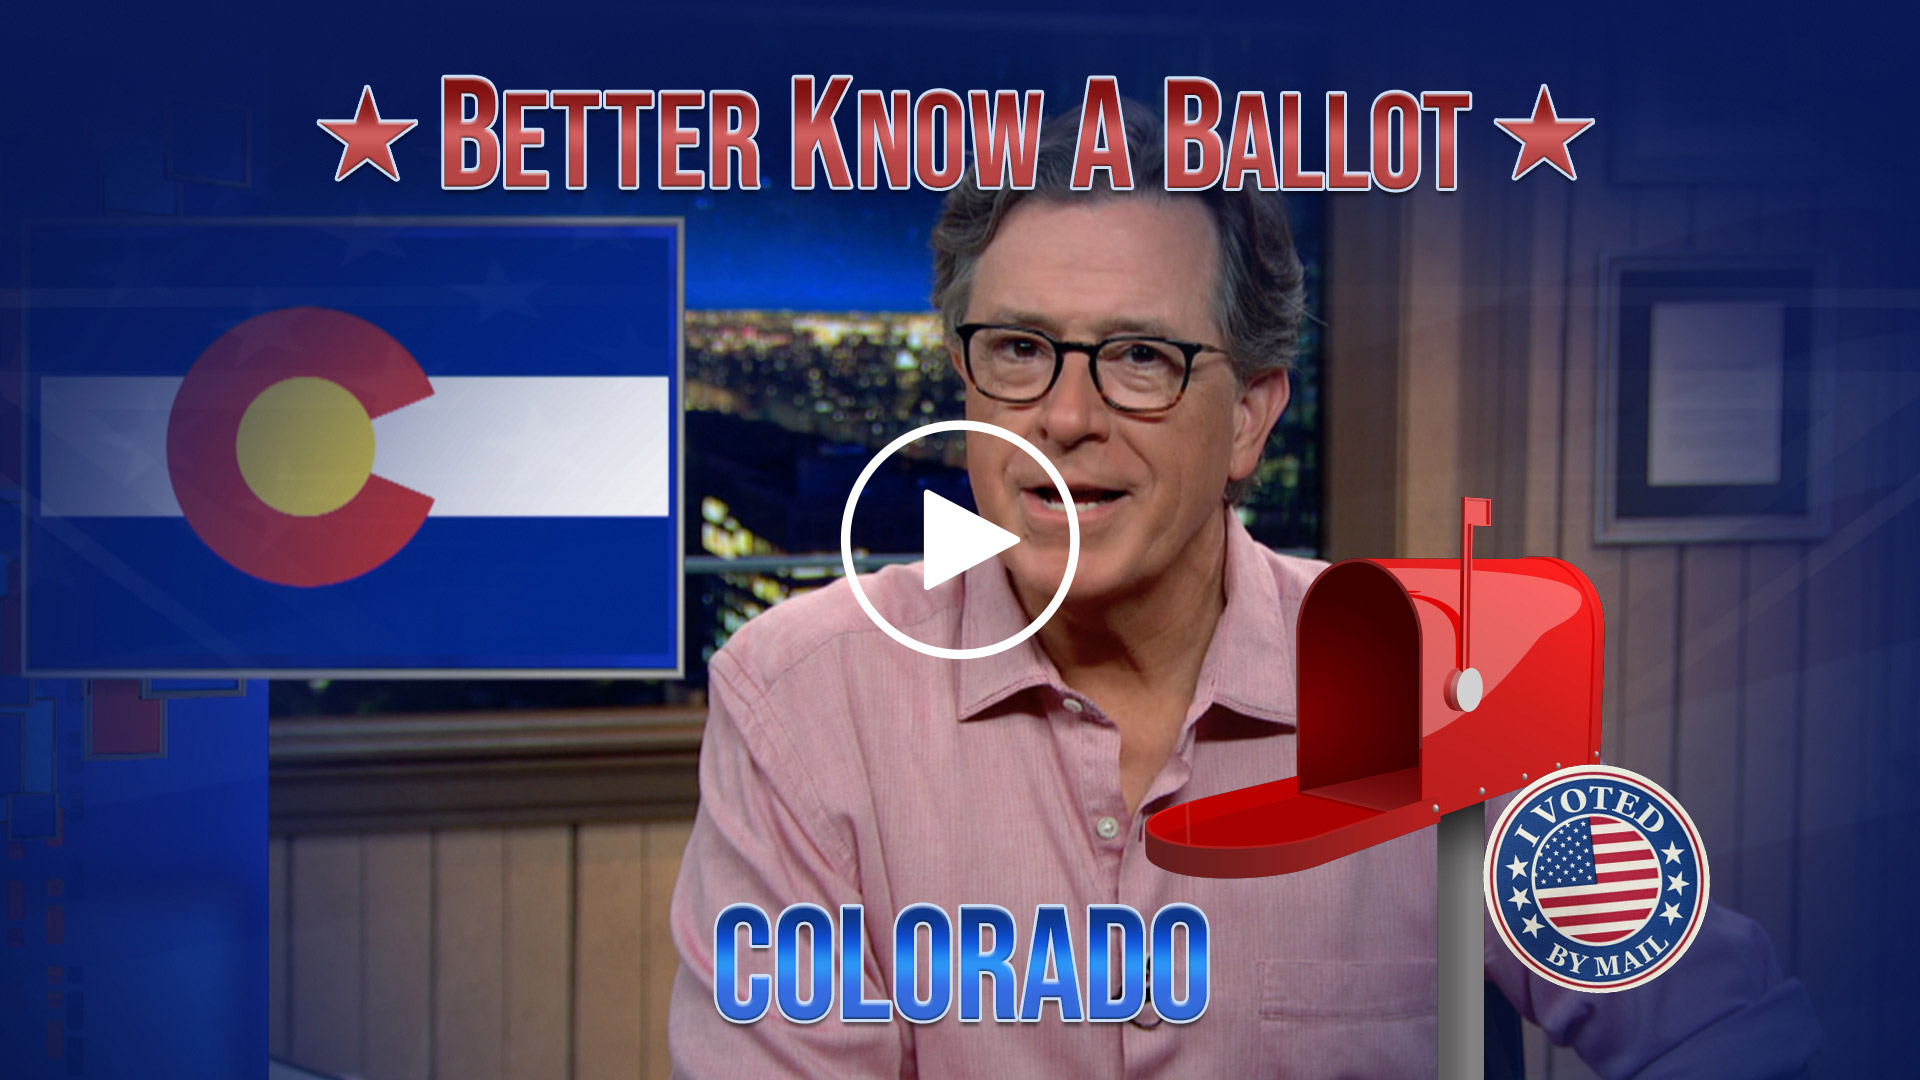 A message from Stephen Colbert FOR THE 2020 ELECTION.